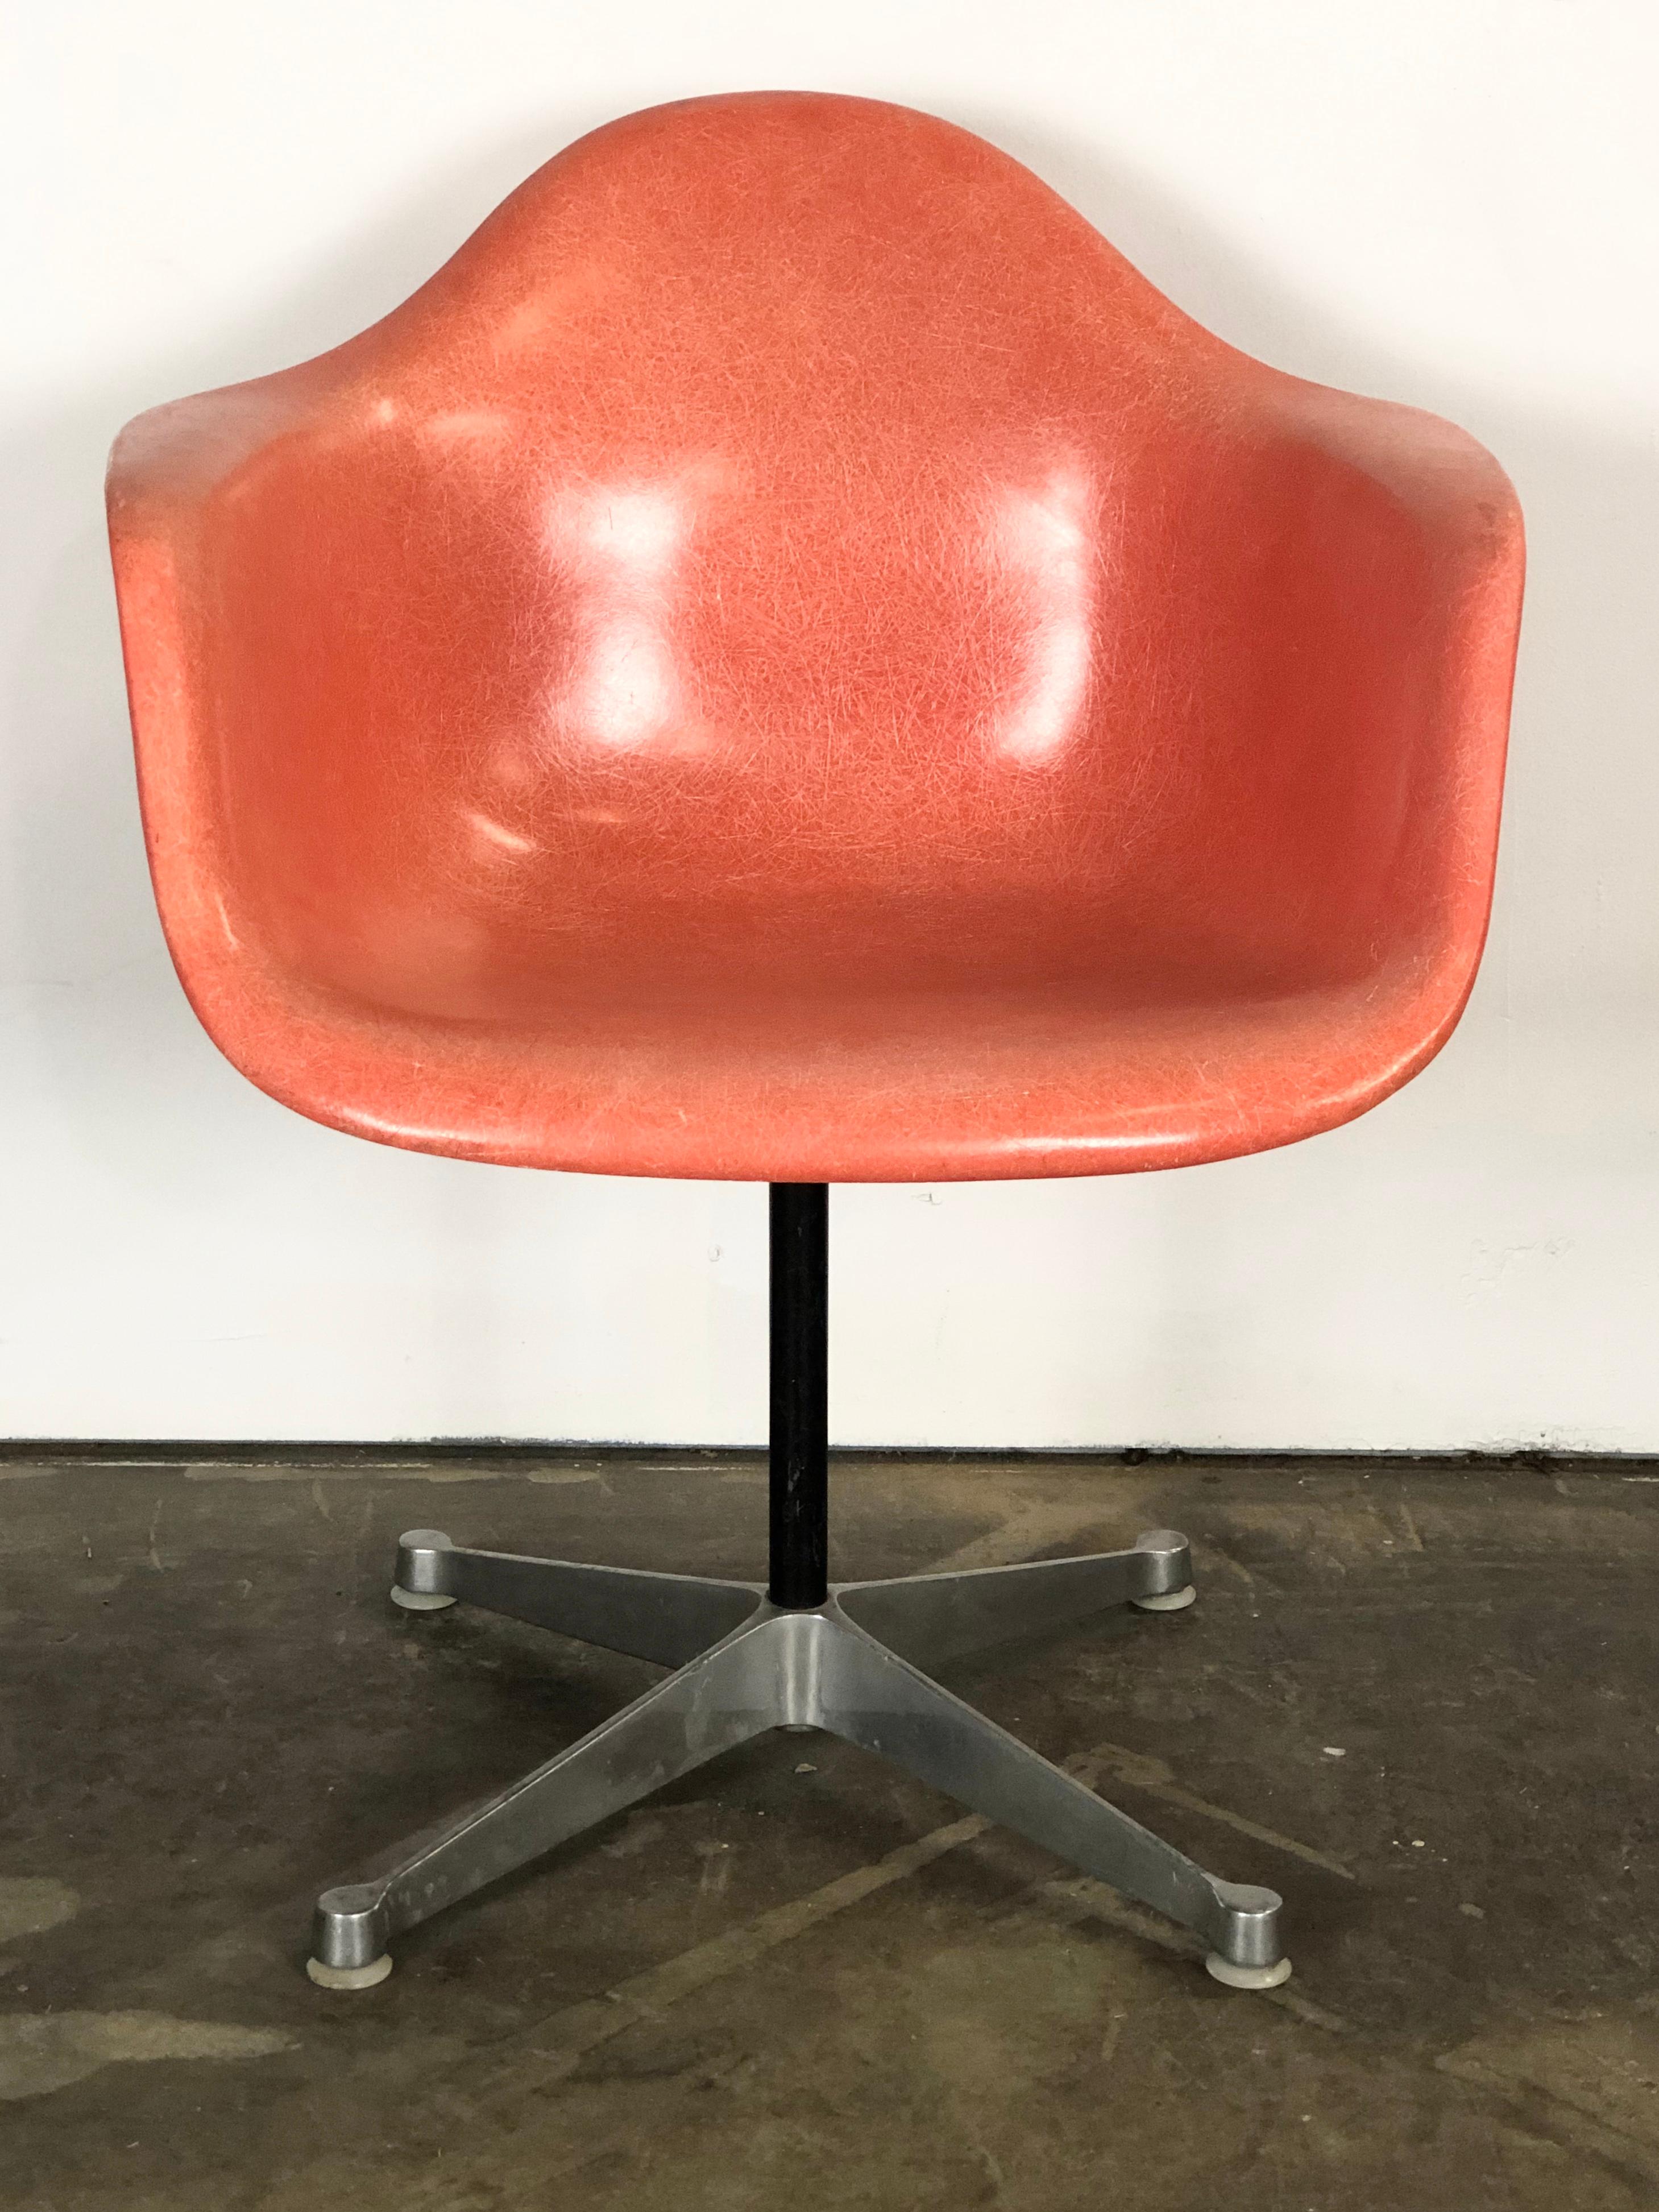 Gorgeous classic example of the Eames fiberglass armchair. A lovely red orange hue makes this among the most appealing and sought after colors of this design. No cracks or holes to the shell. Normal wear commensurate with age and use. Signed Herman